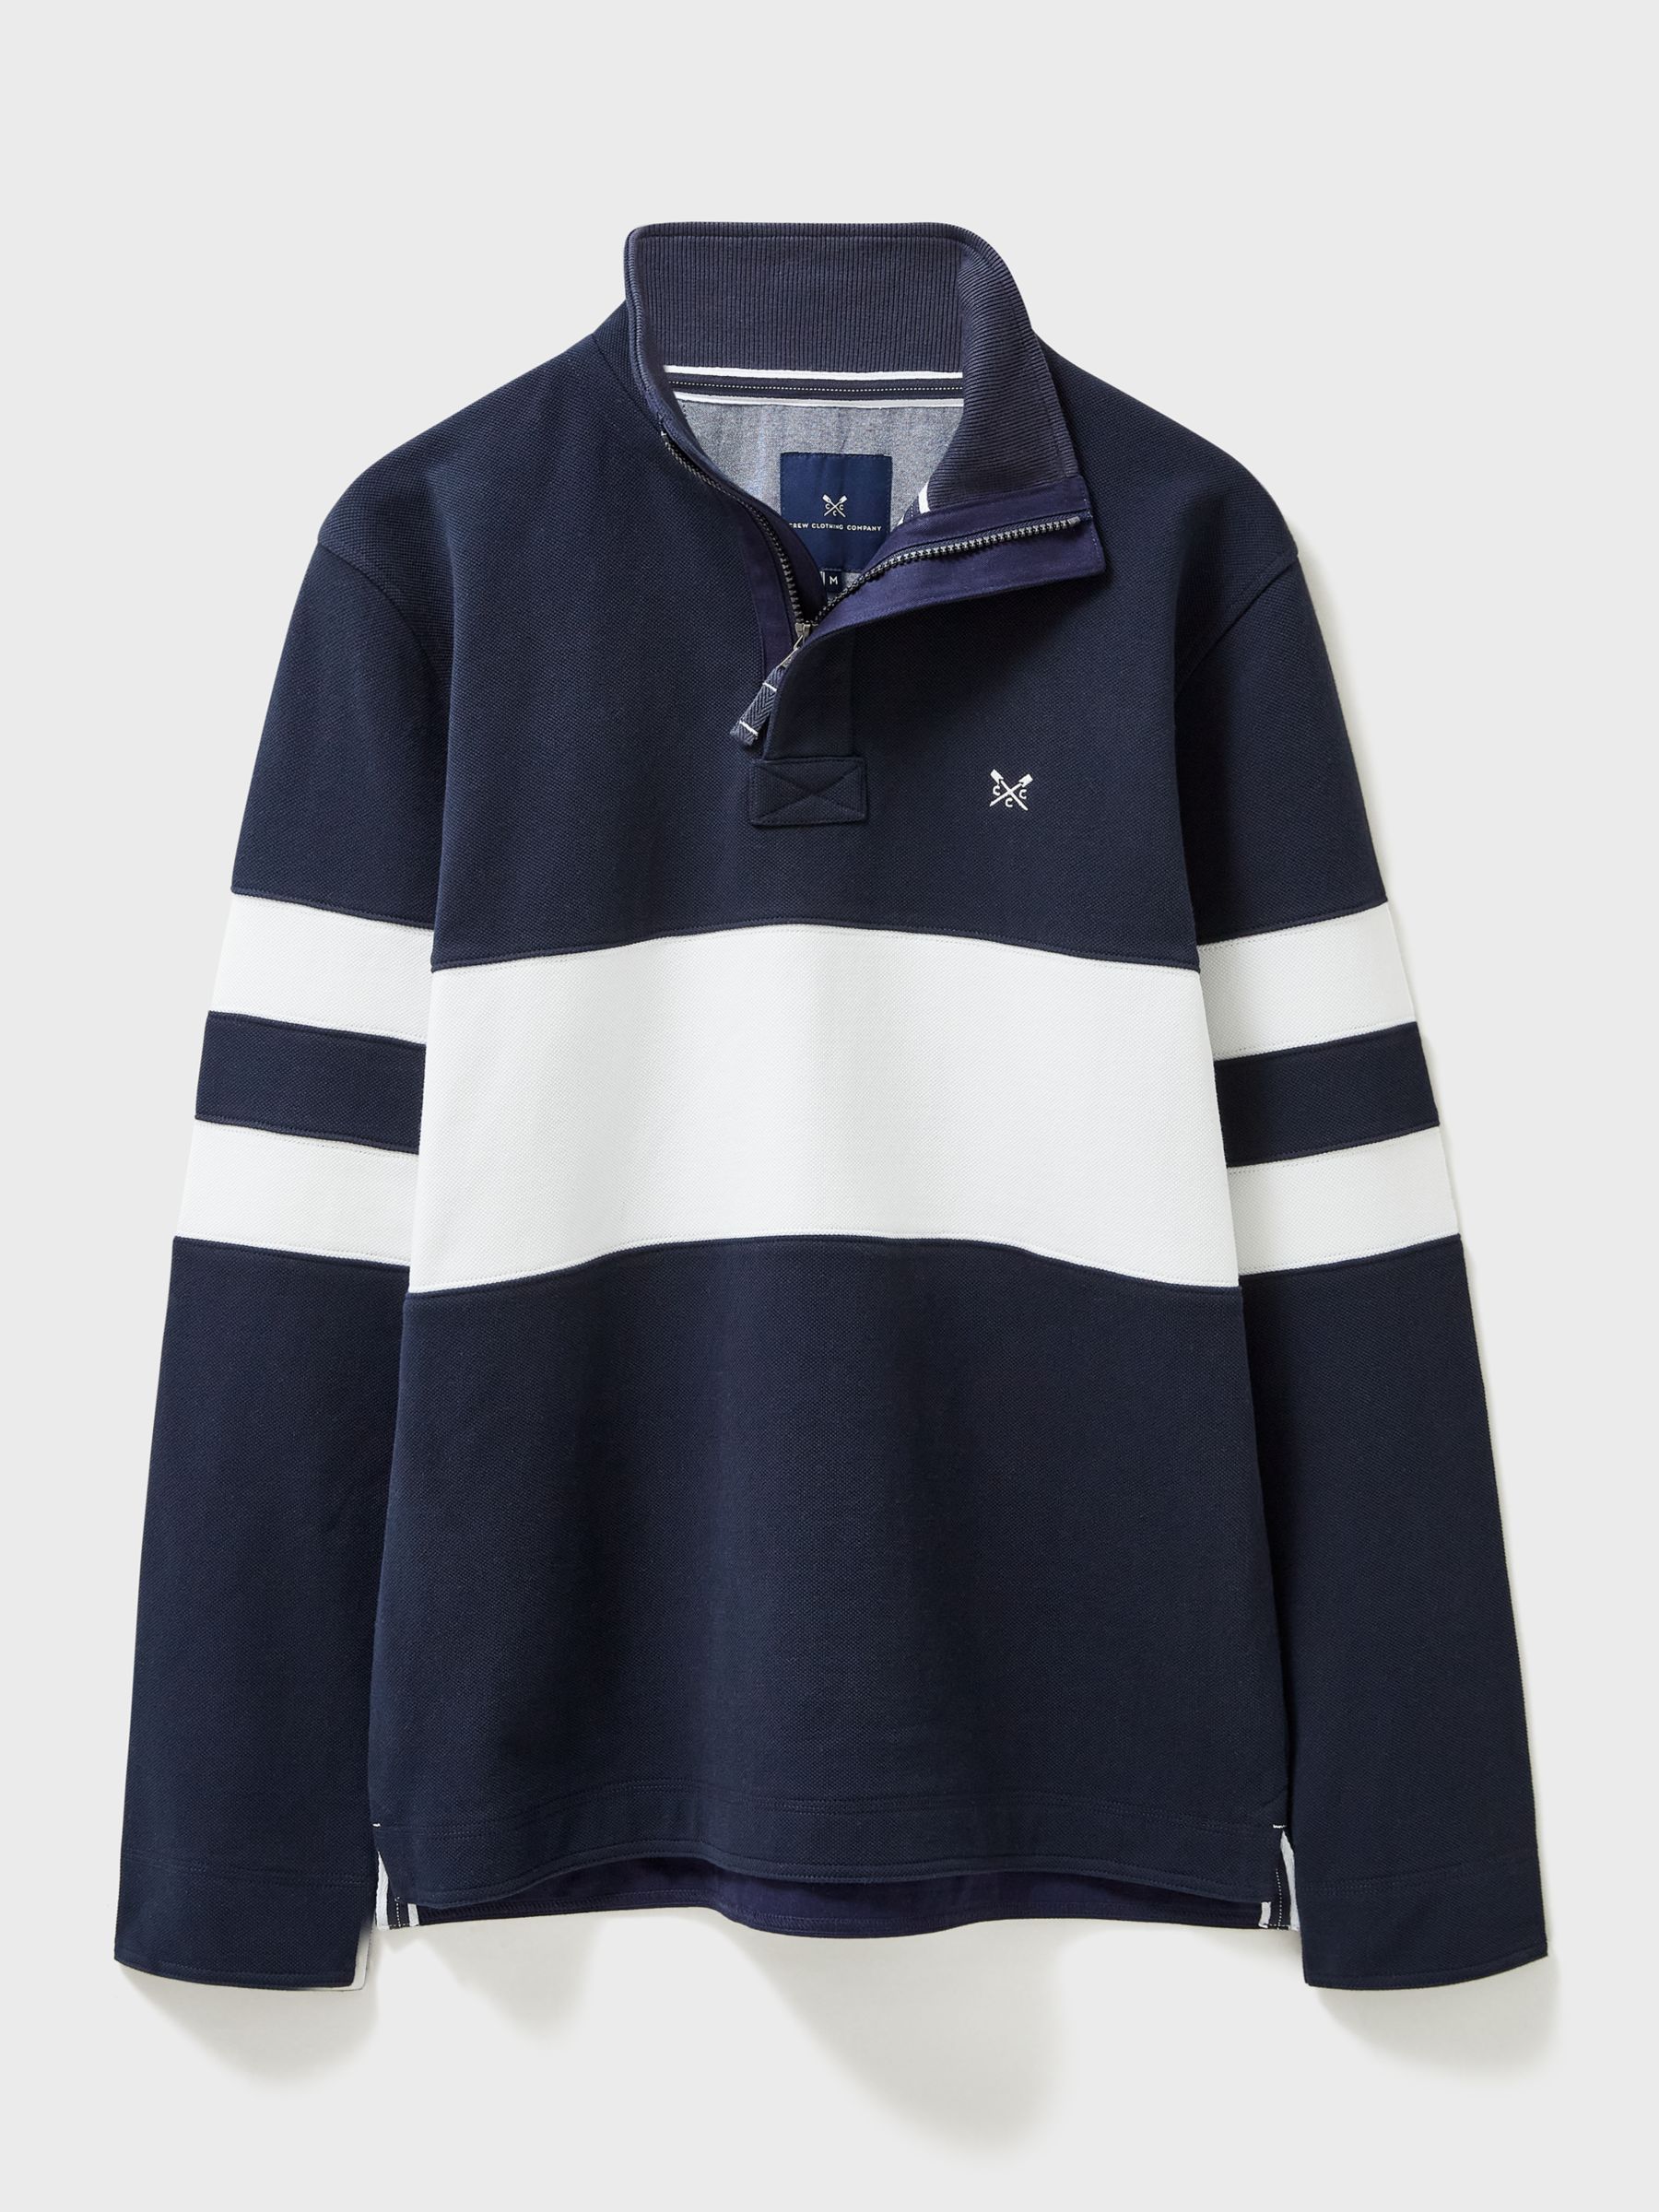 Buy Crew Clothing Padstow Pique Bold White Stripe Jumper, Navy/White Online at johnlewis.com